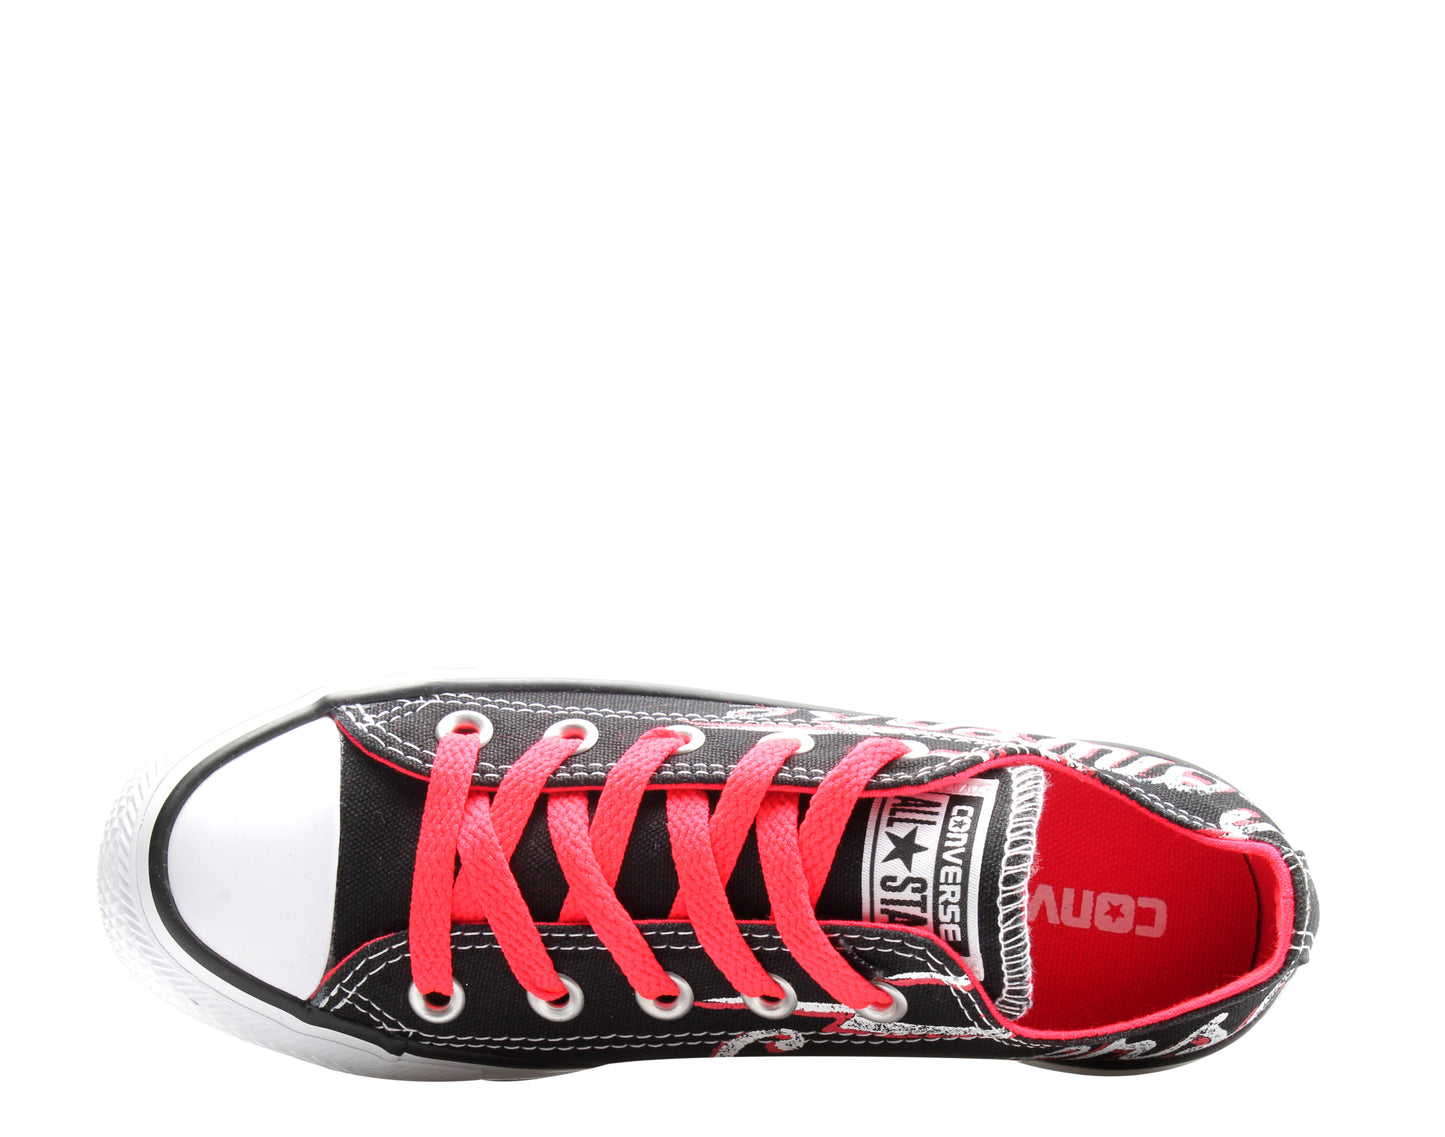 Converse Chuck Taylor All Star Ox Branded Low Top Sneakers